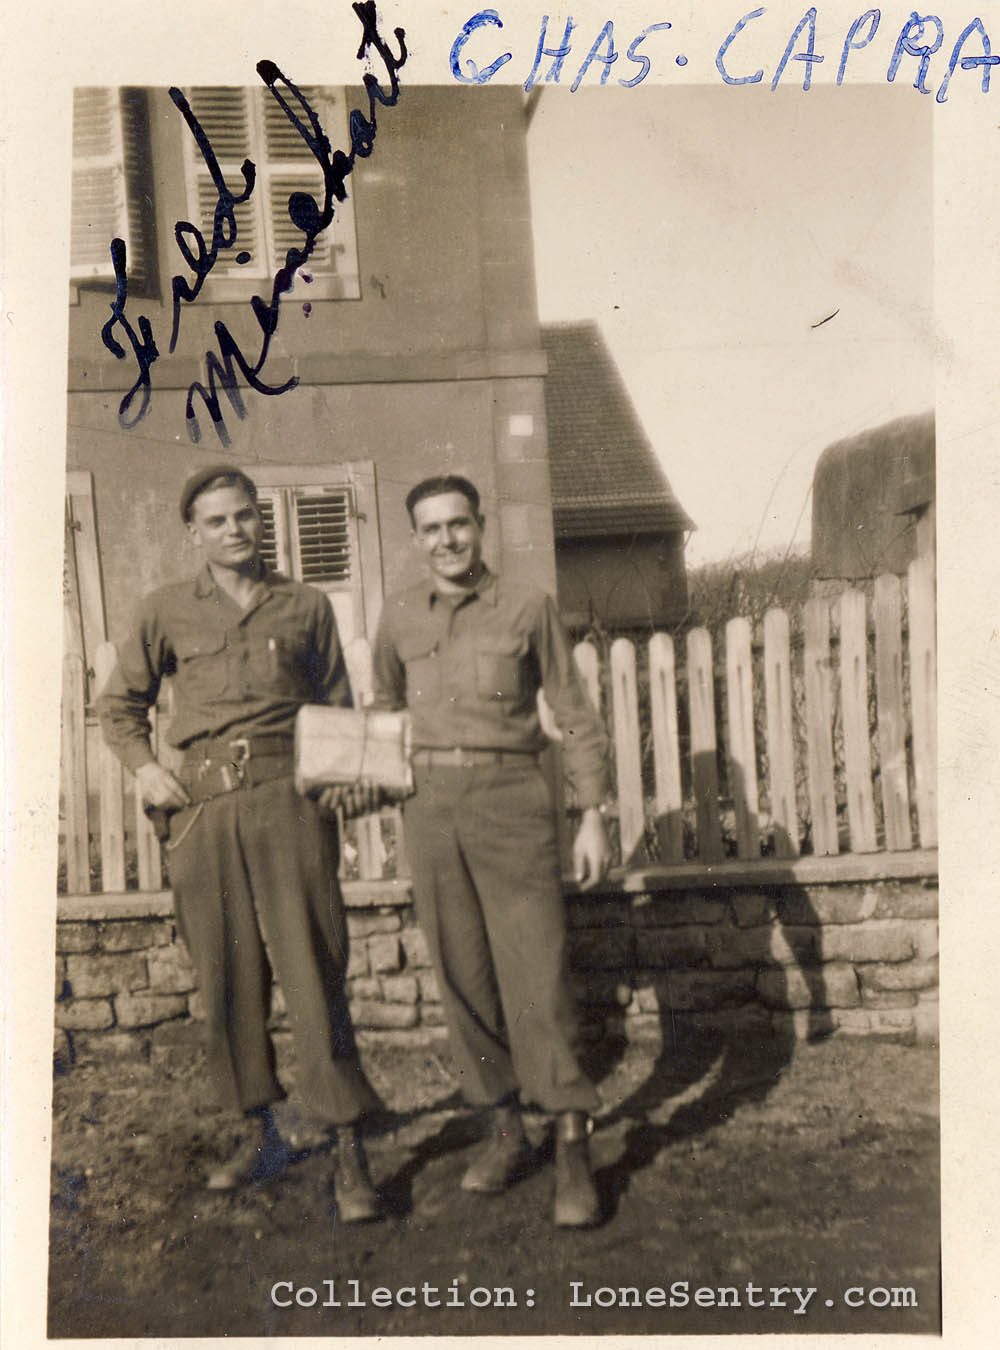 Soldiers of the 995th Field Artillery Battalion in Alsace, February 1945: Charles Capra and Fred Minehart. (Collection LoneSentry.com)